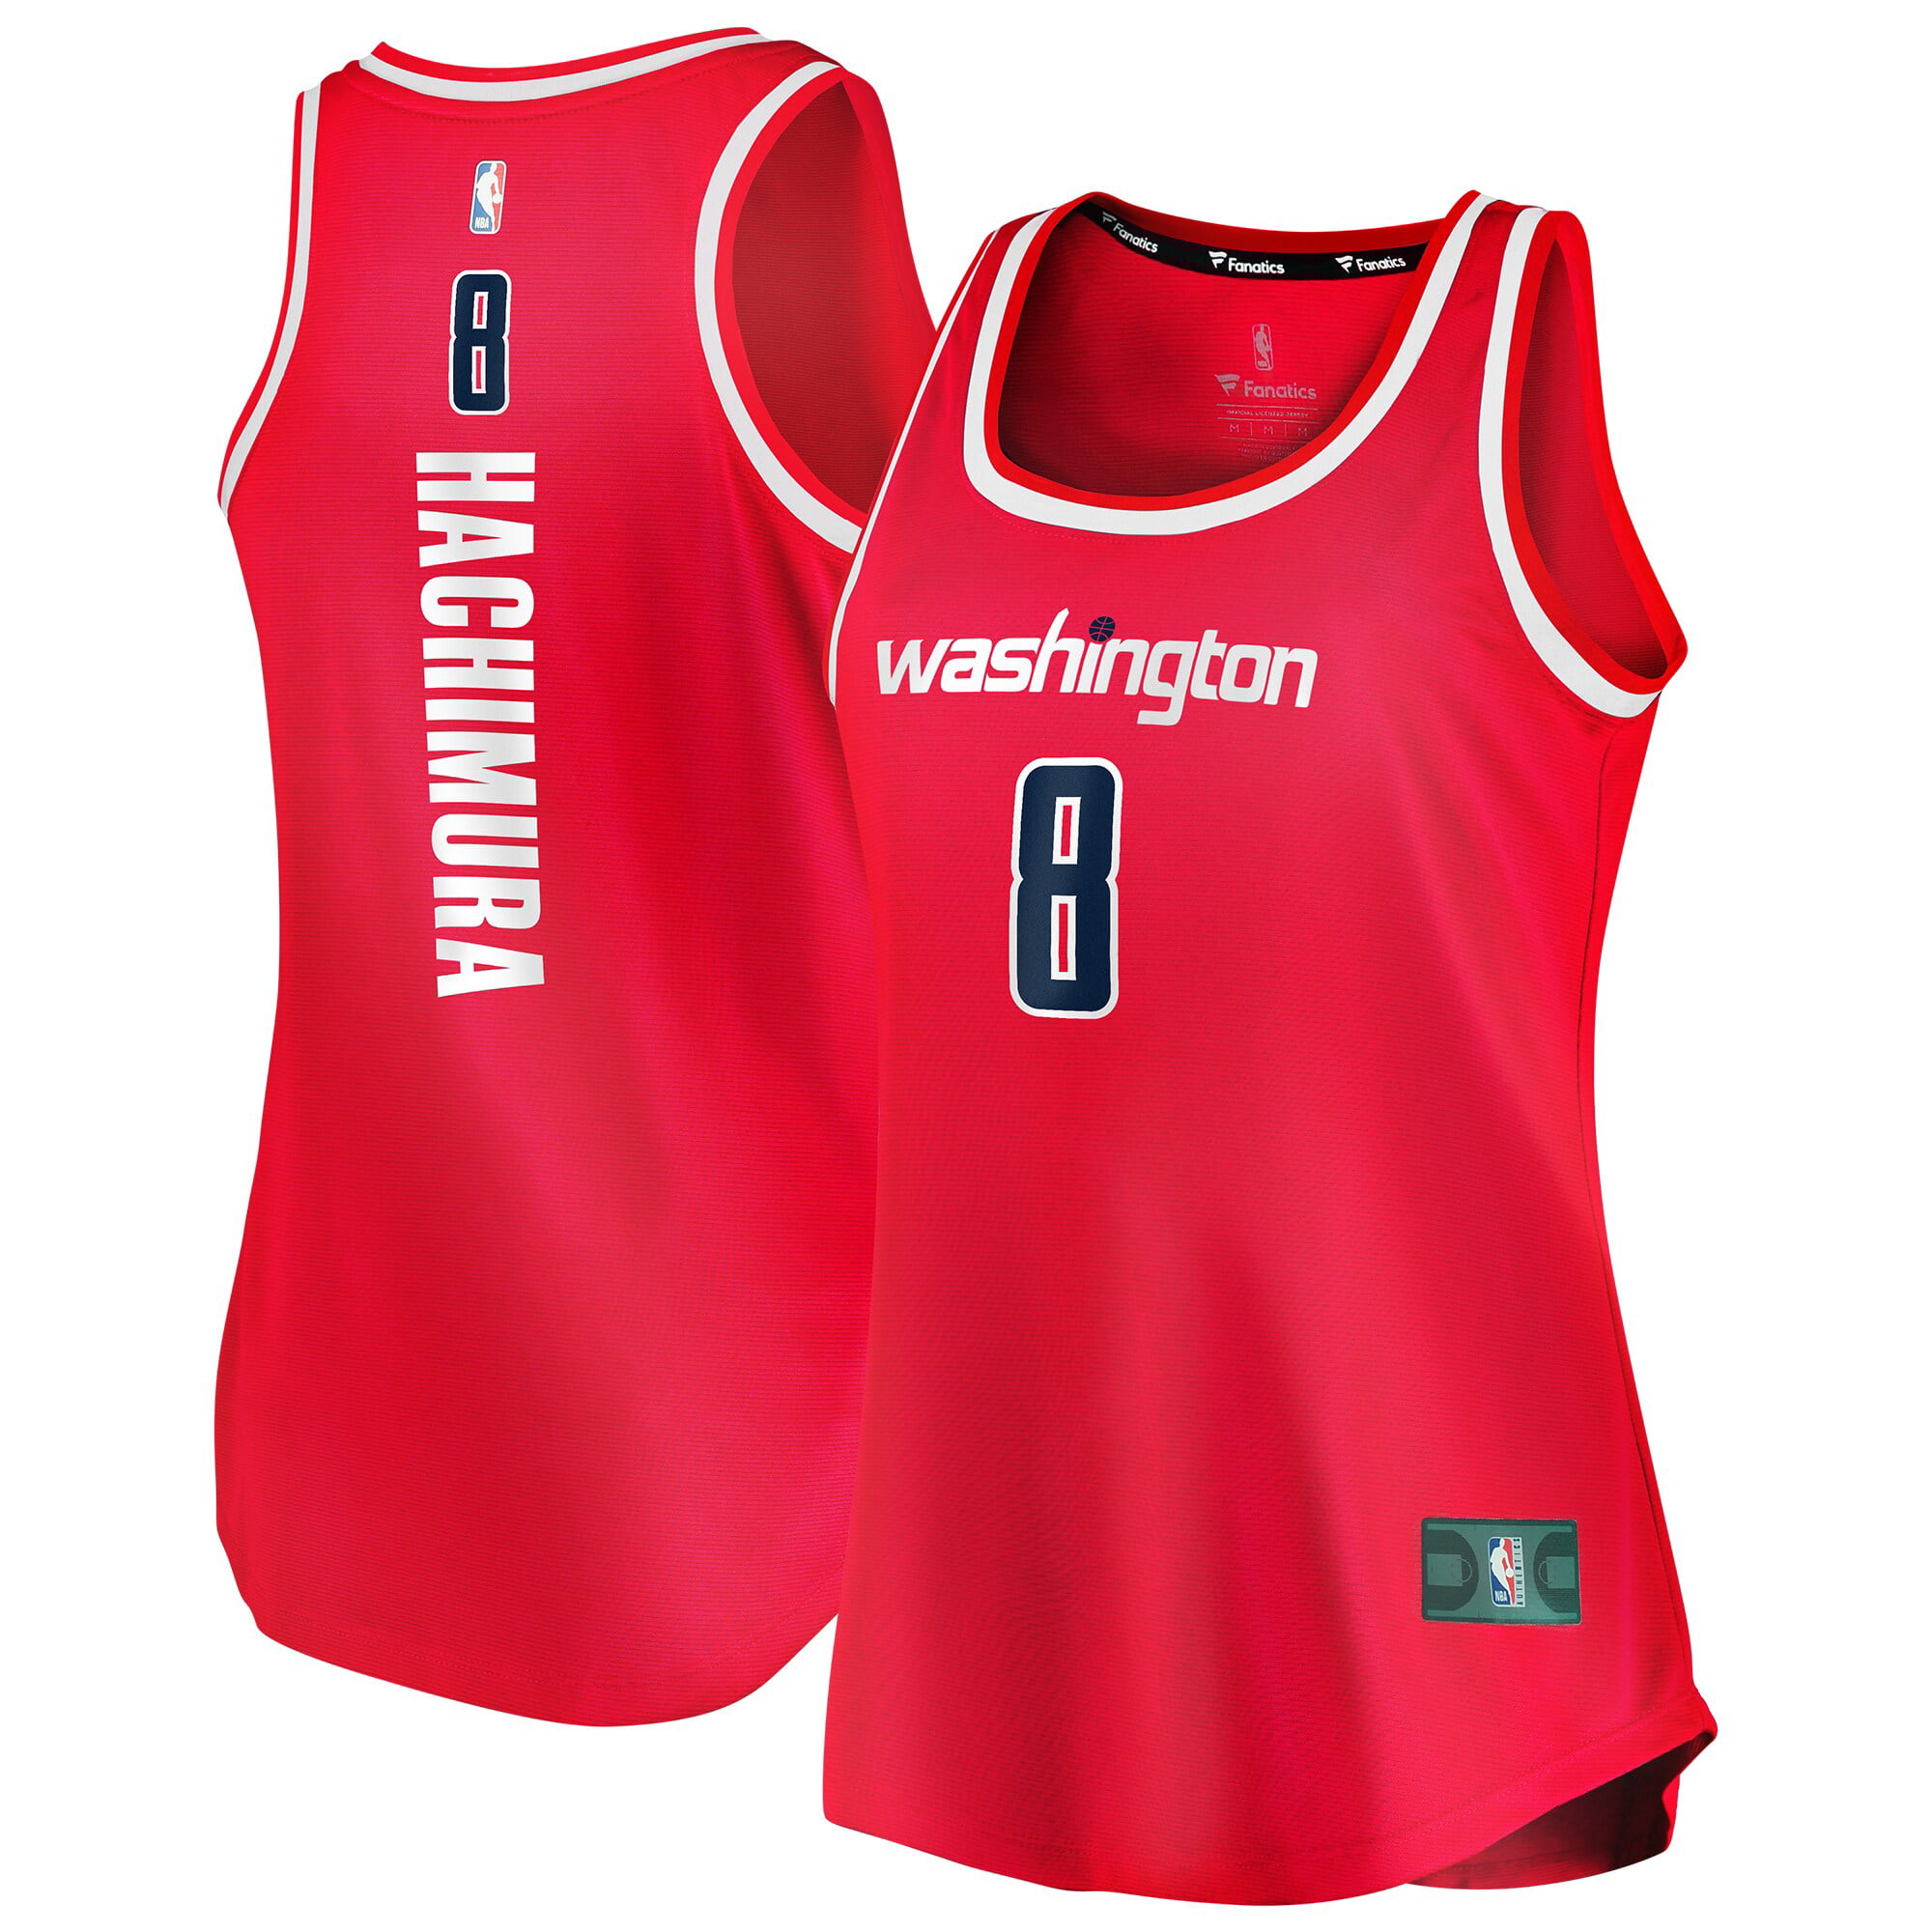 wizards jersey 2019